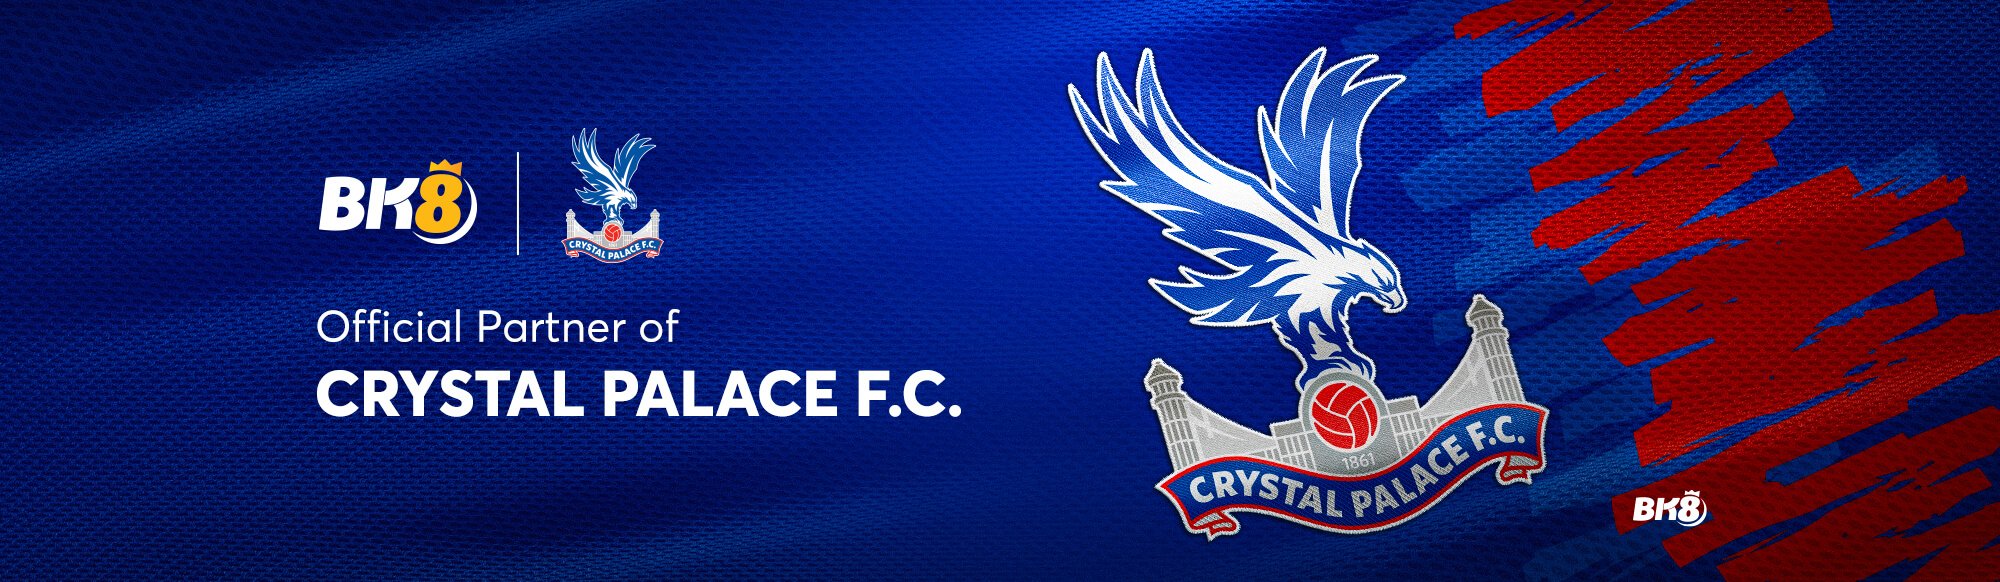 BK8-Official-Partner-of-Crystal-Palace-F.C.